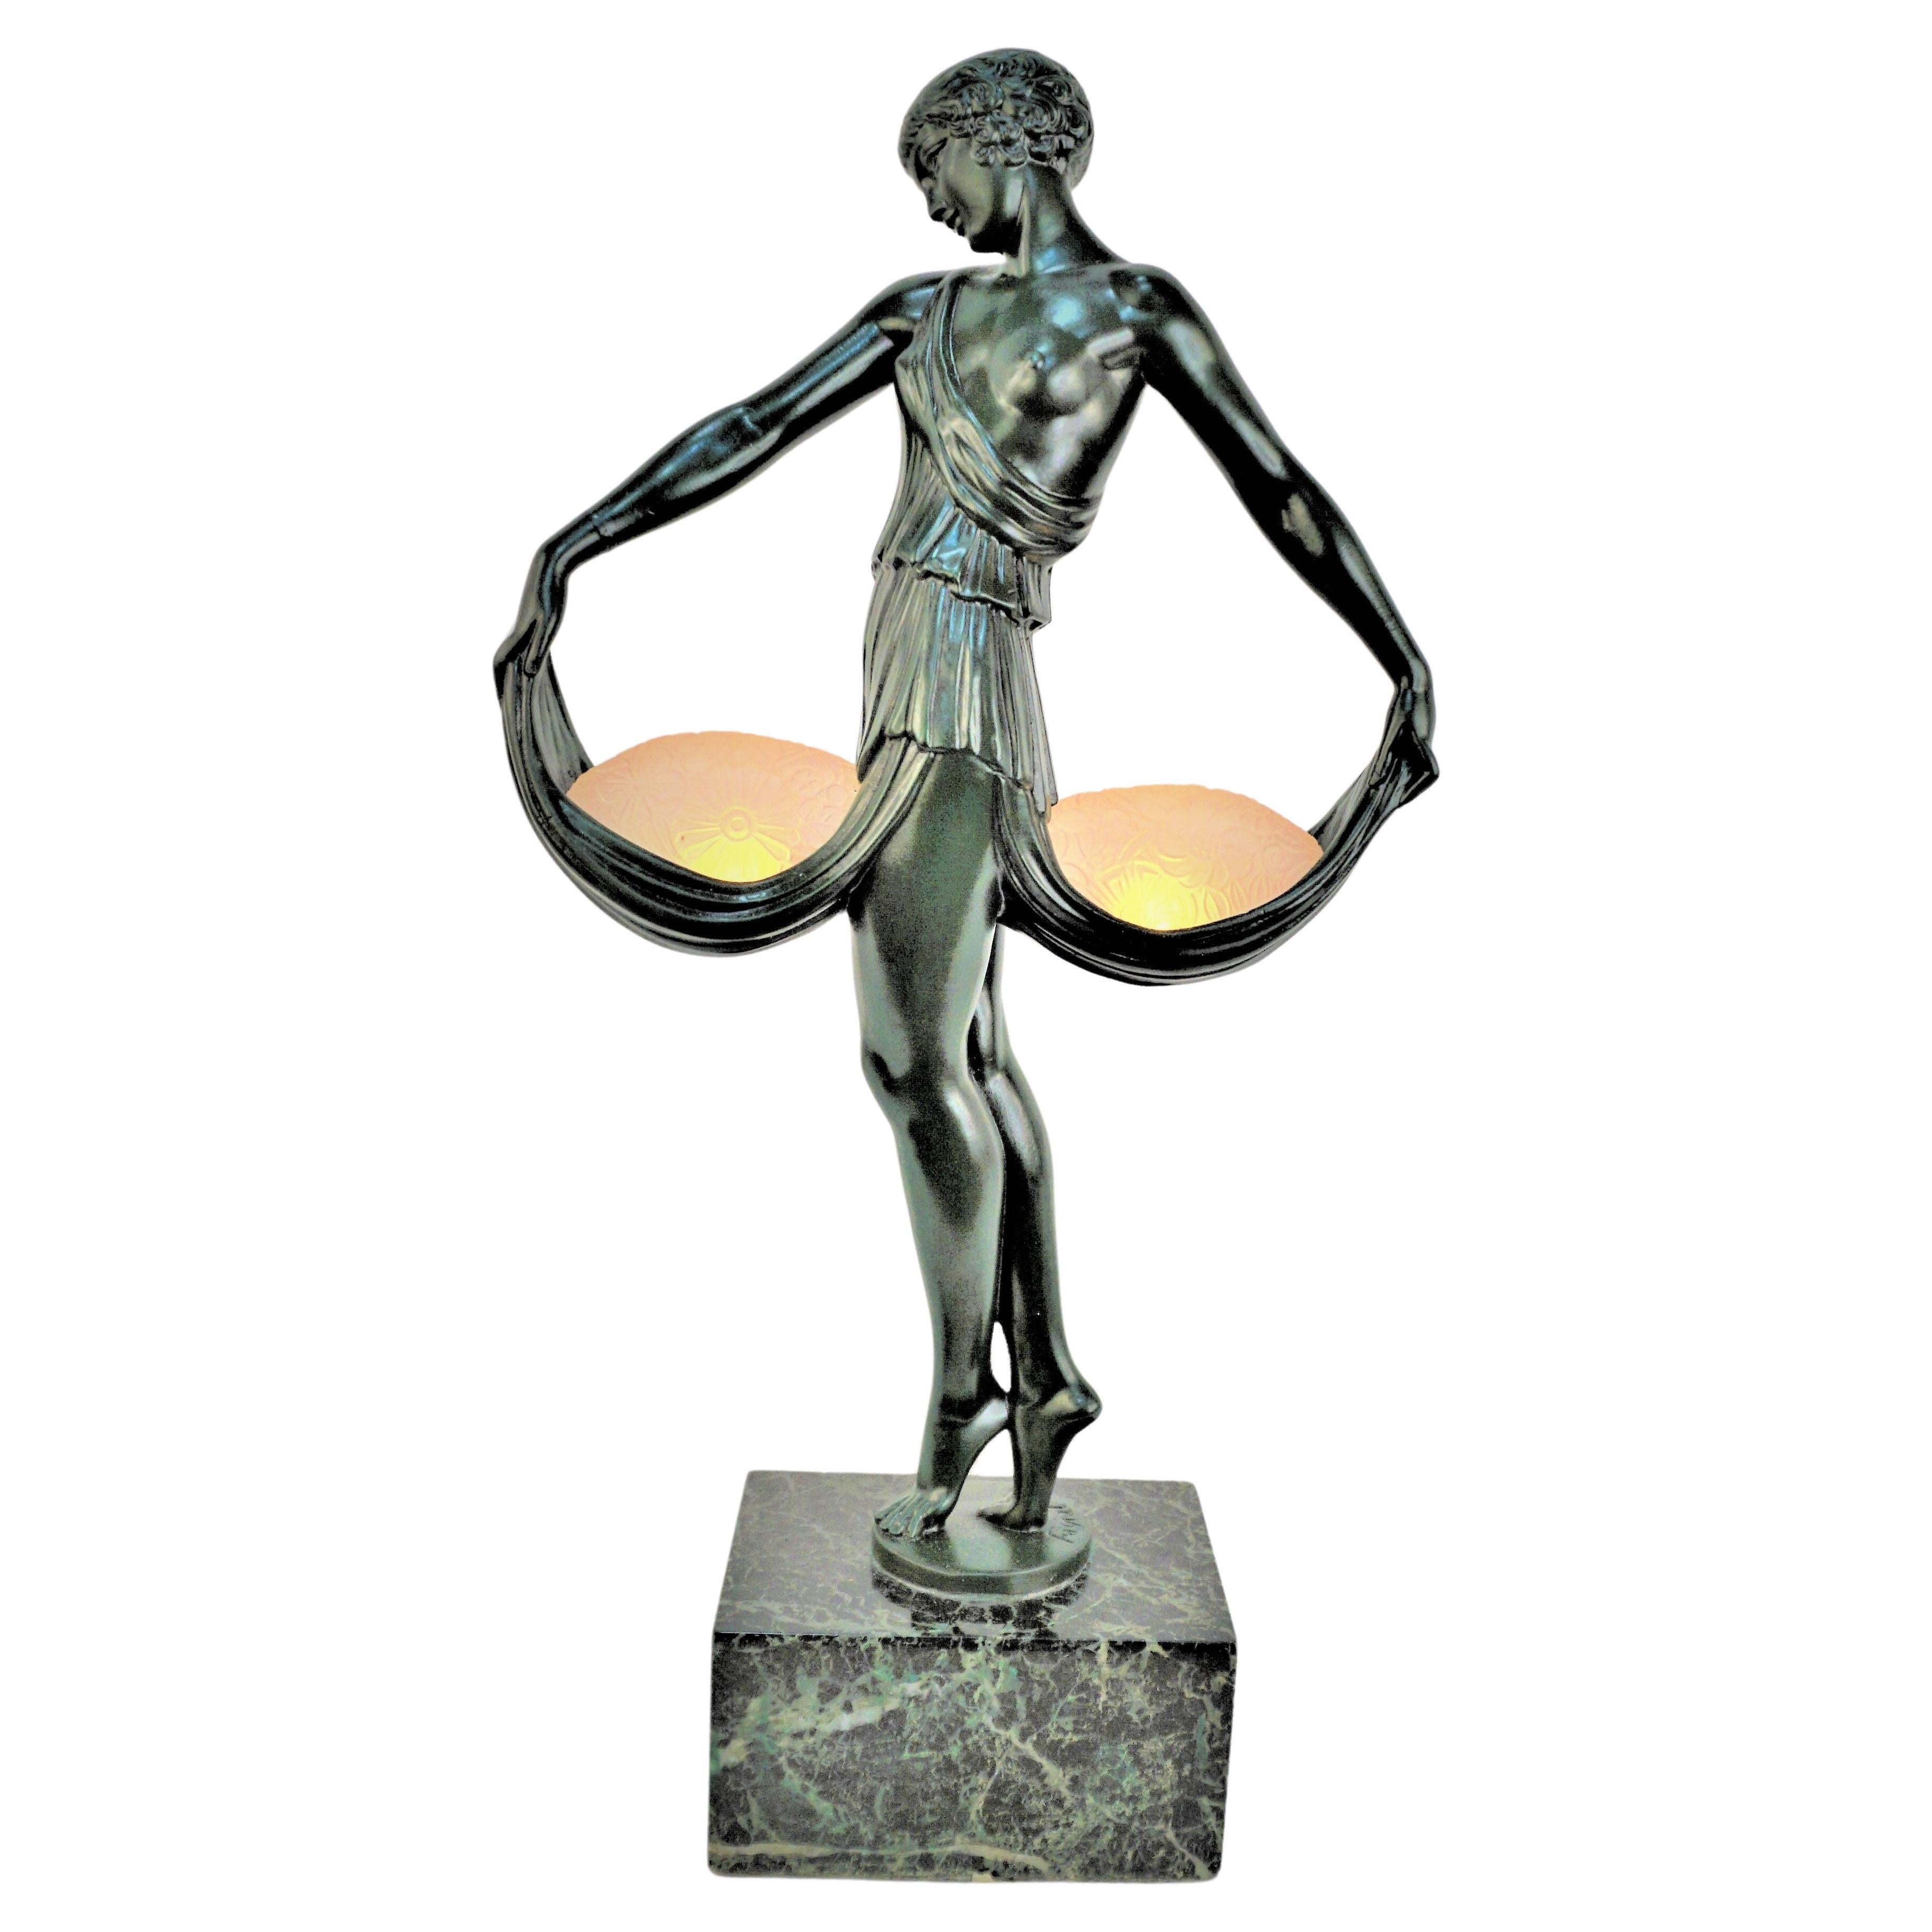 Rare French Art Deco Table Lamp Sculpture by Fayral